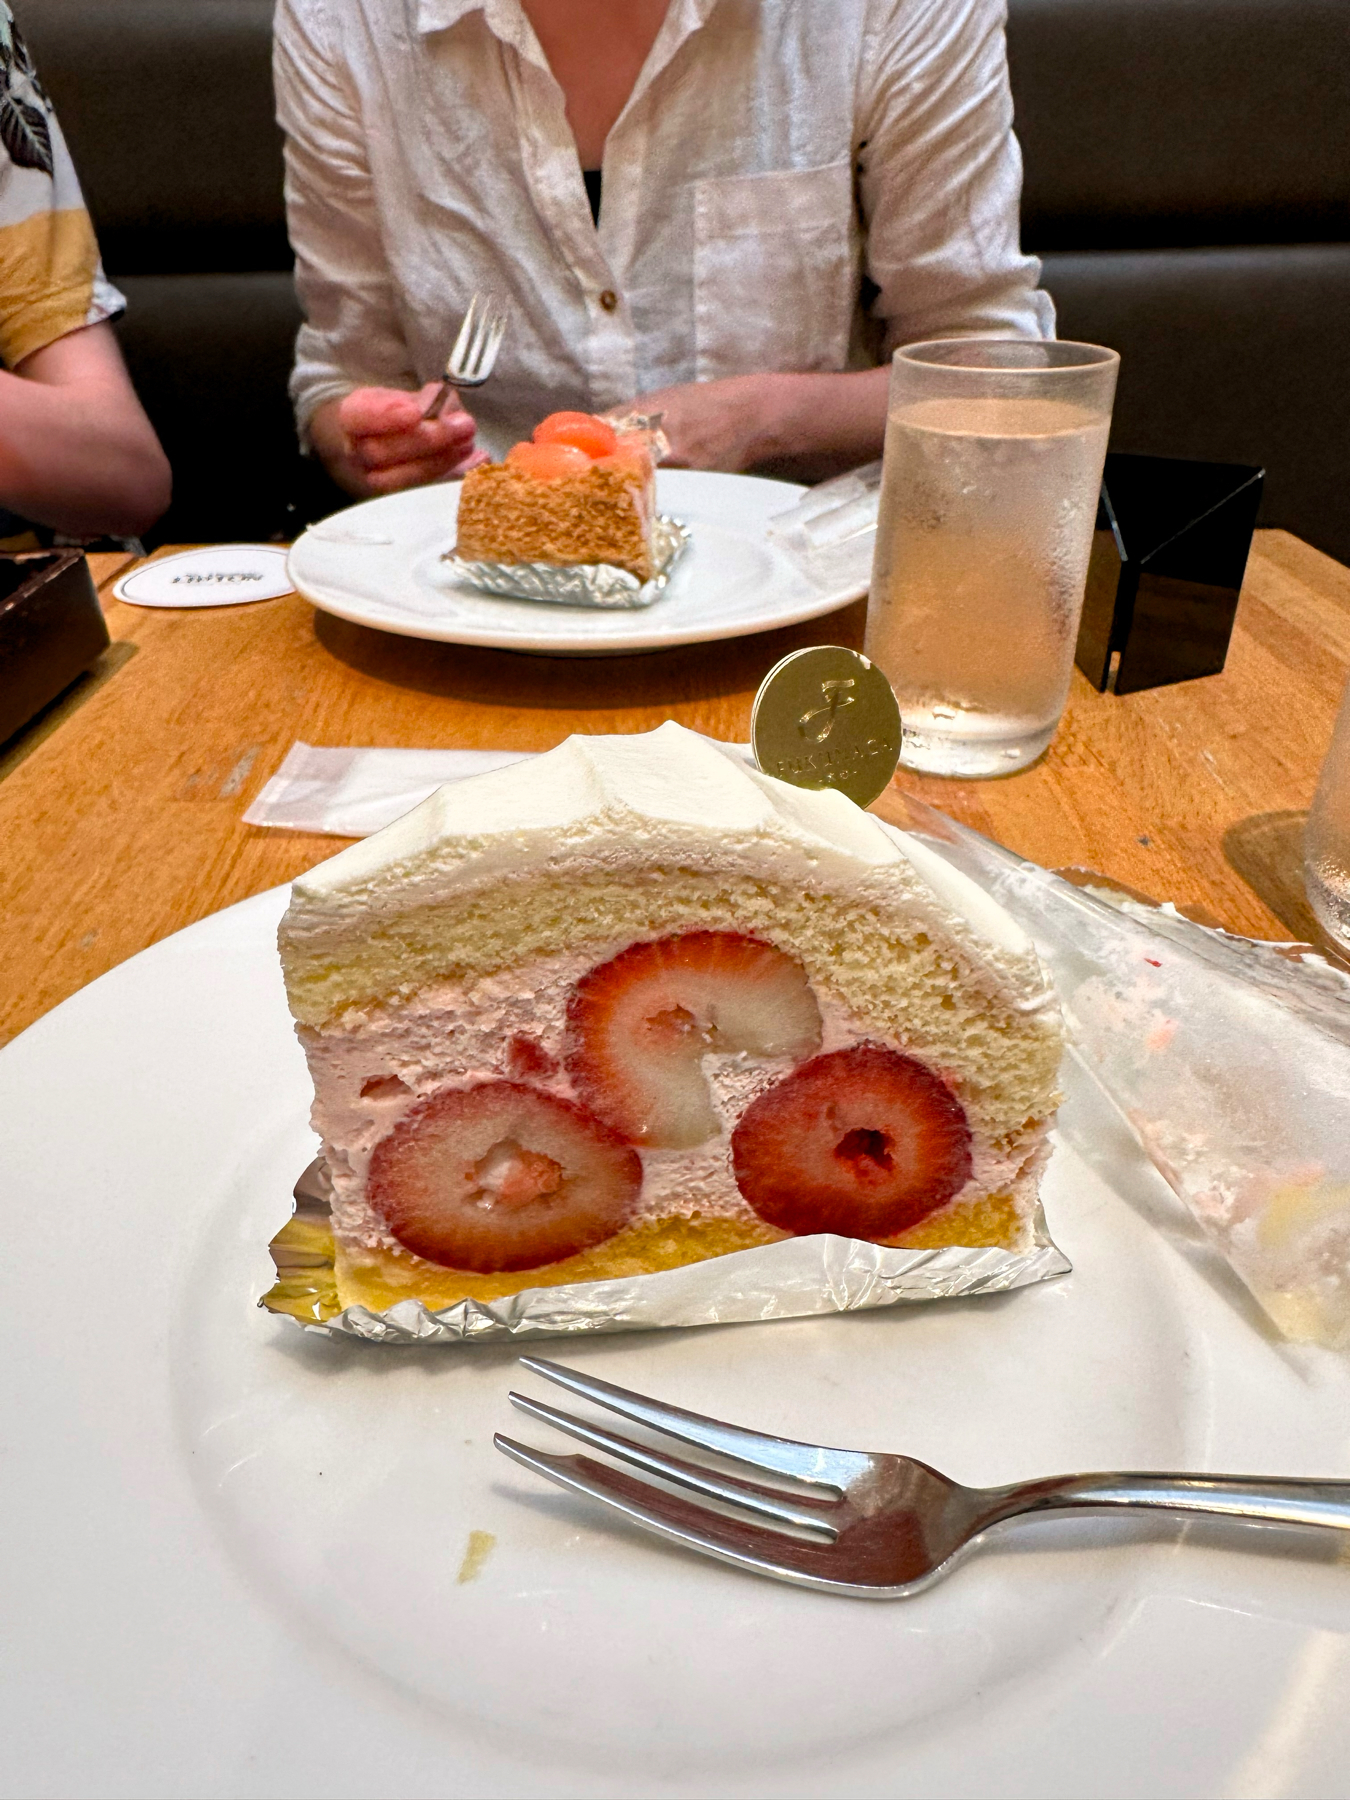 A piece of strawberry shortcake on a plate with a fork, featuring sliced strawberries in its filling, accompanied by another slice of cake with melon balls on another plate in the background. There&rsquo;s a glass of water on the table.